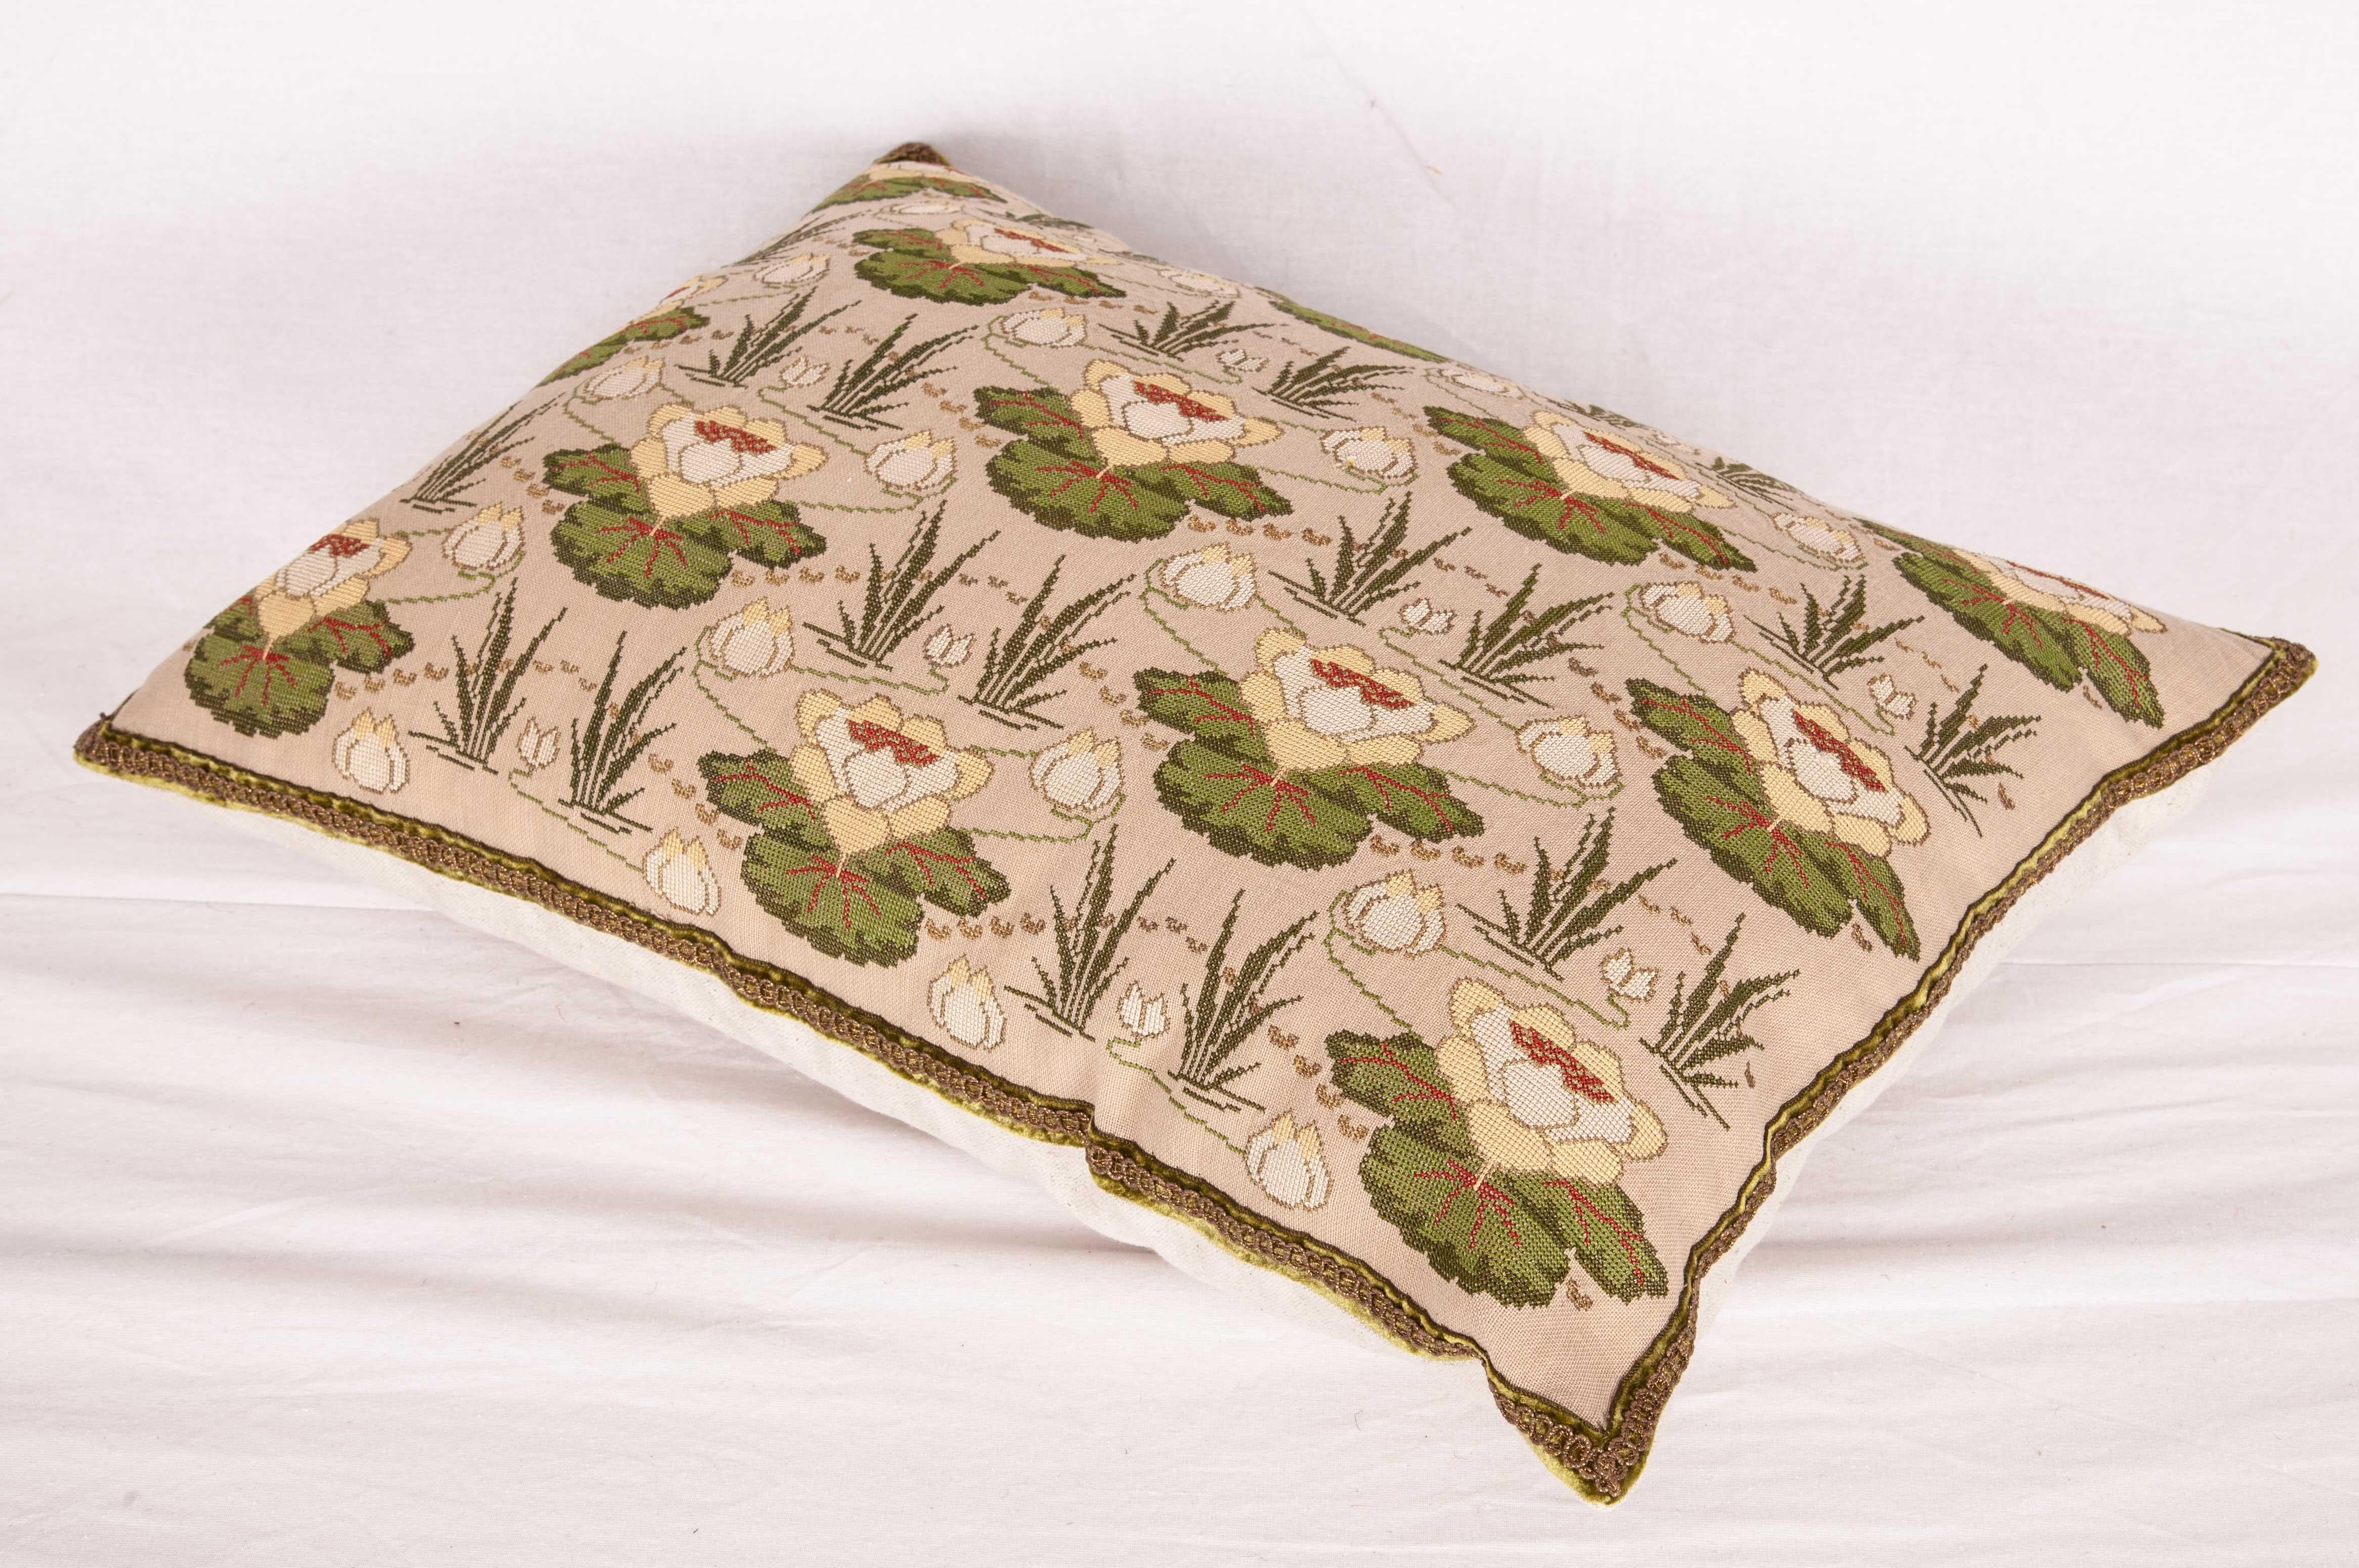 Bulgarian Antique Embroidered Pillow from Eastern Europe, Bulgaria, Early 20th Century For Sale